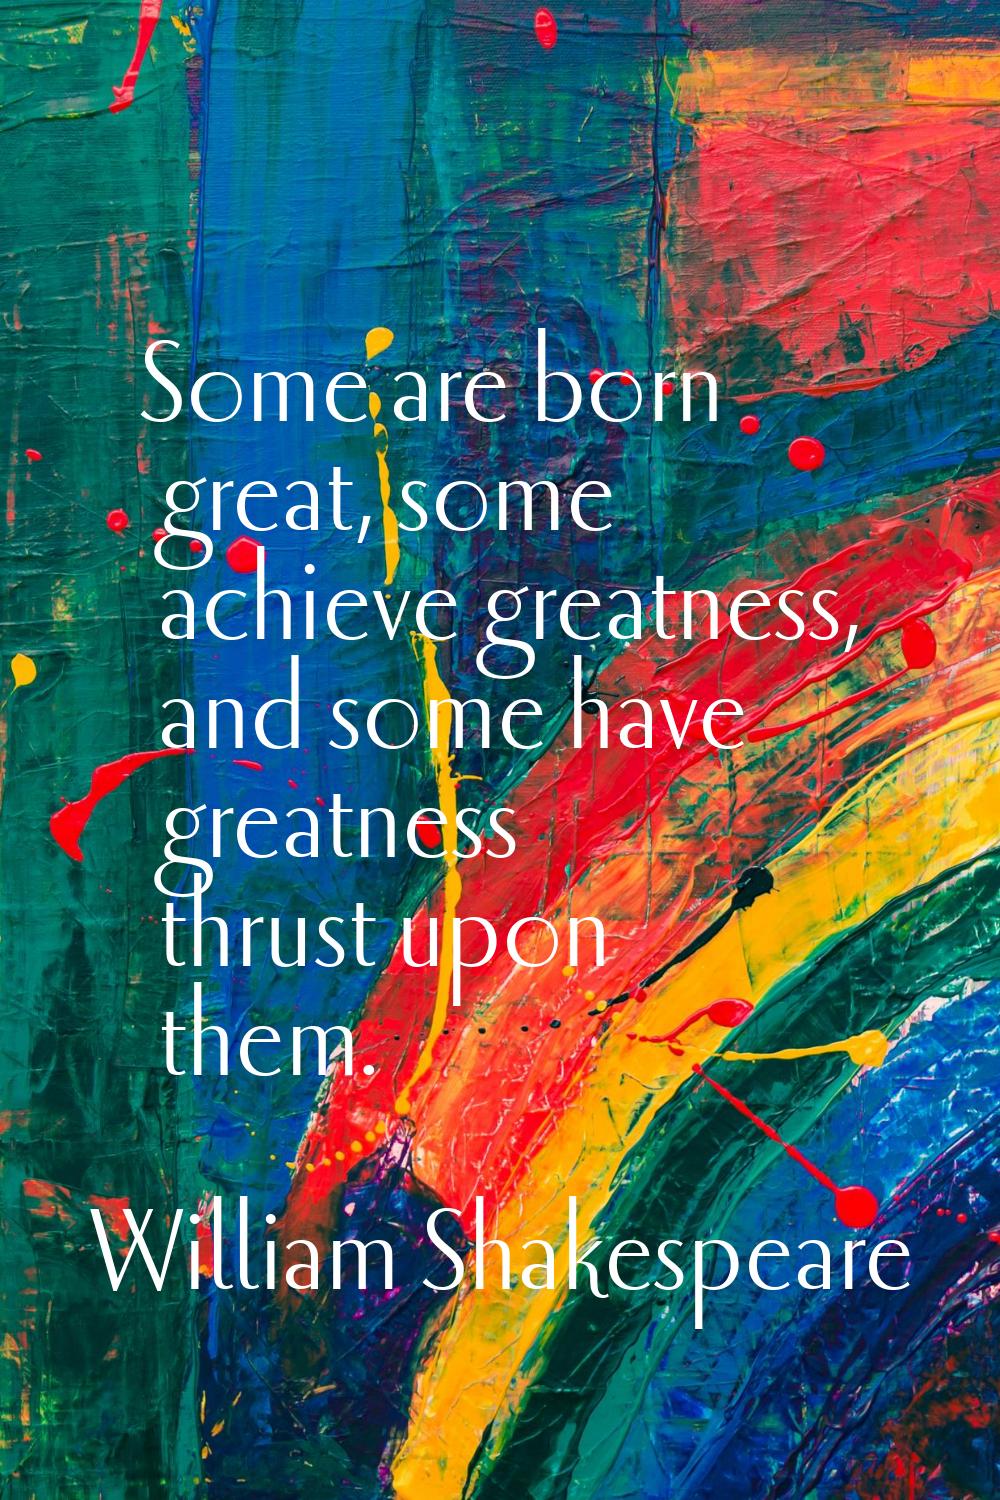 Some are born great, some achieve greatness, and some have greatness thrust upon them.